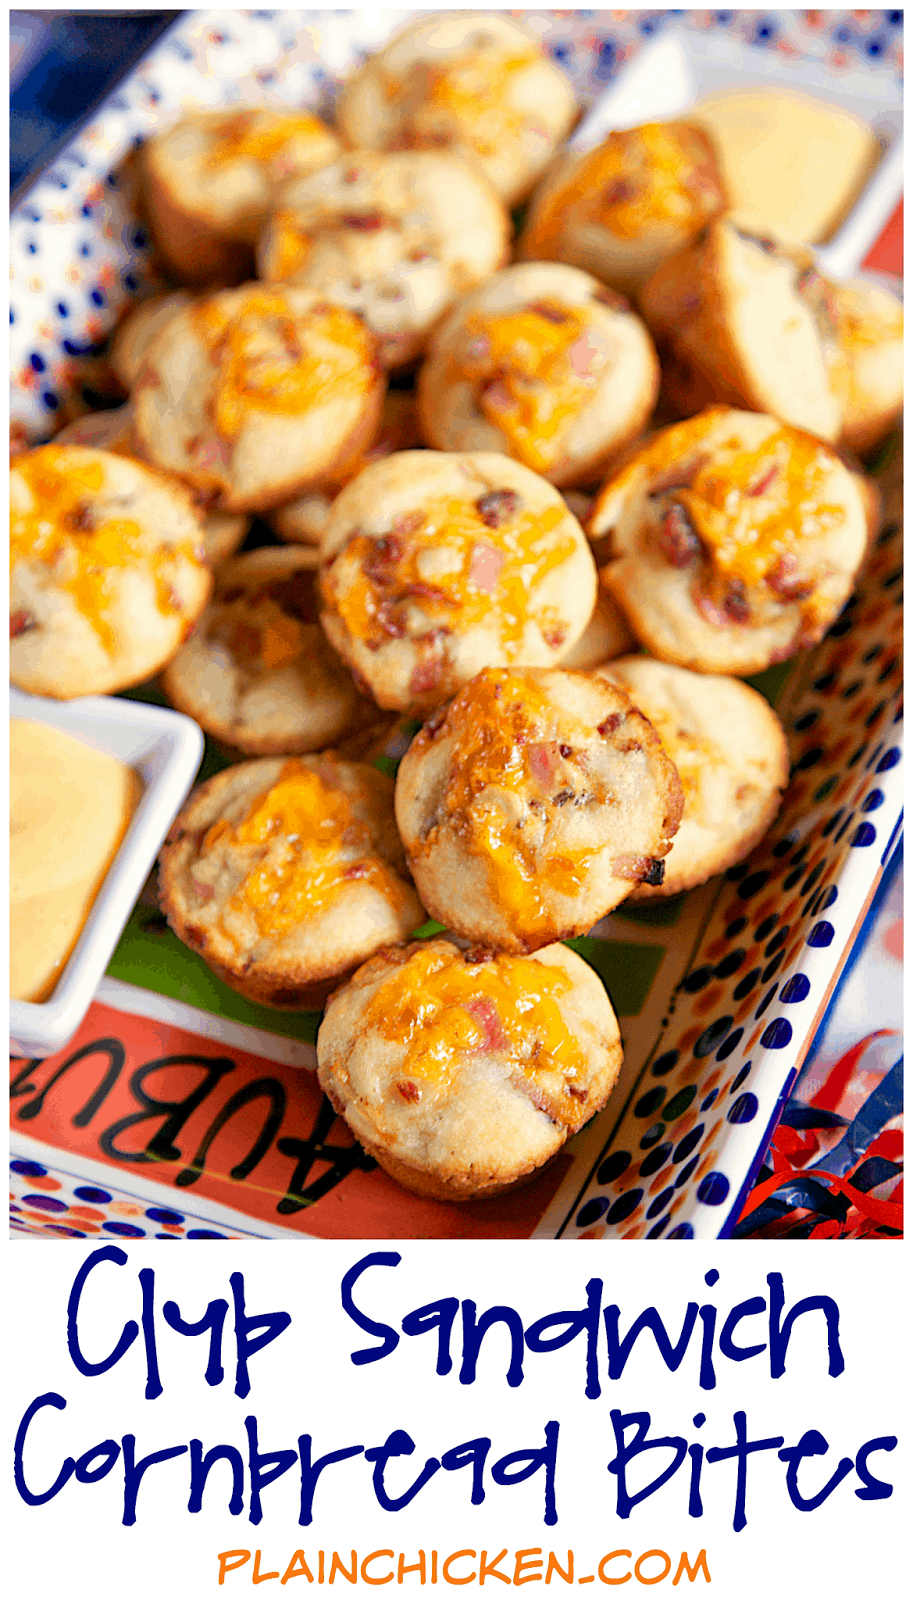 Club Sandwich Cornbread Bites Recipe - Martha White Cornbread mix topped with a ham, turkey, bacon, cheese and honey mustard mixture baked in mini muffin pans. Serve with additional honey mustard. GREAT for tailgating, brunch, baby showers or any other type of party. We've also eaten these for lunch and dinner. Ready in under 15 minutes!